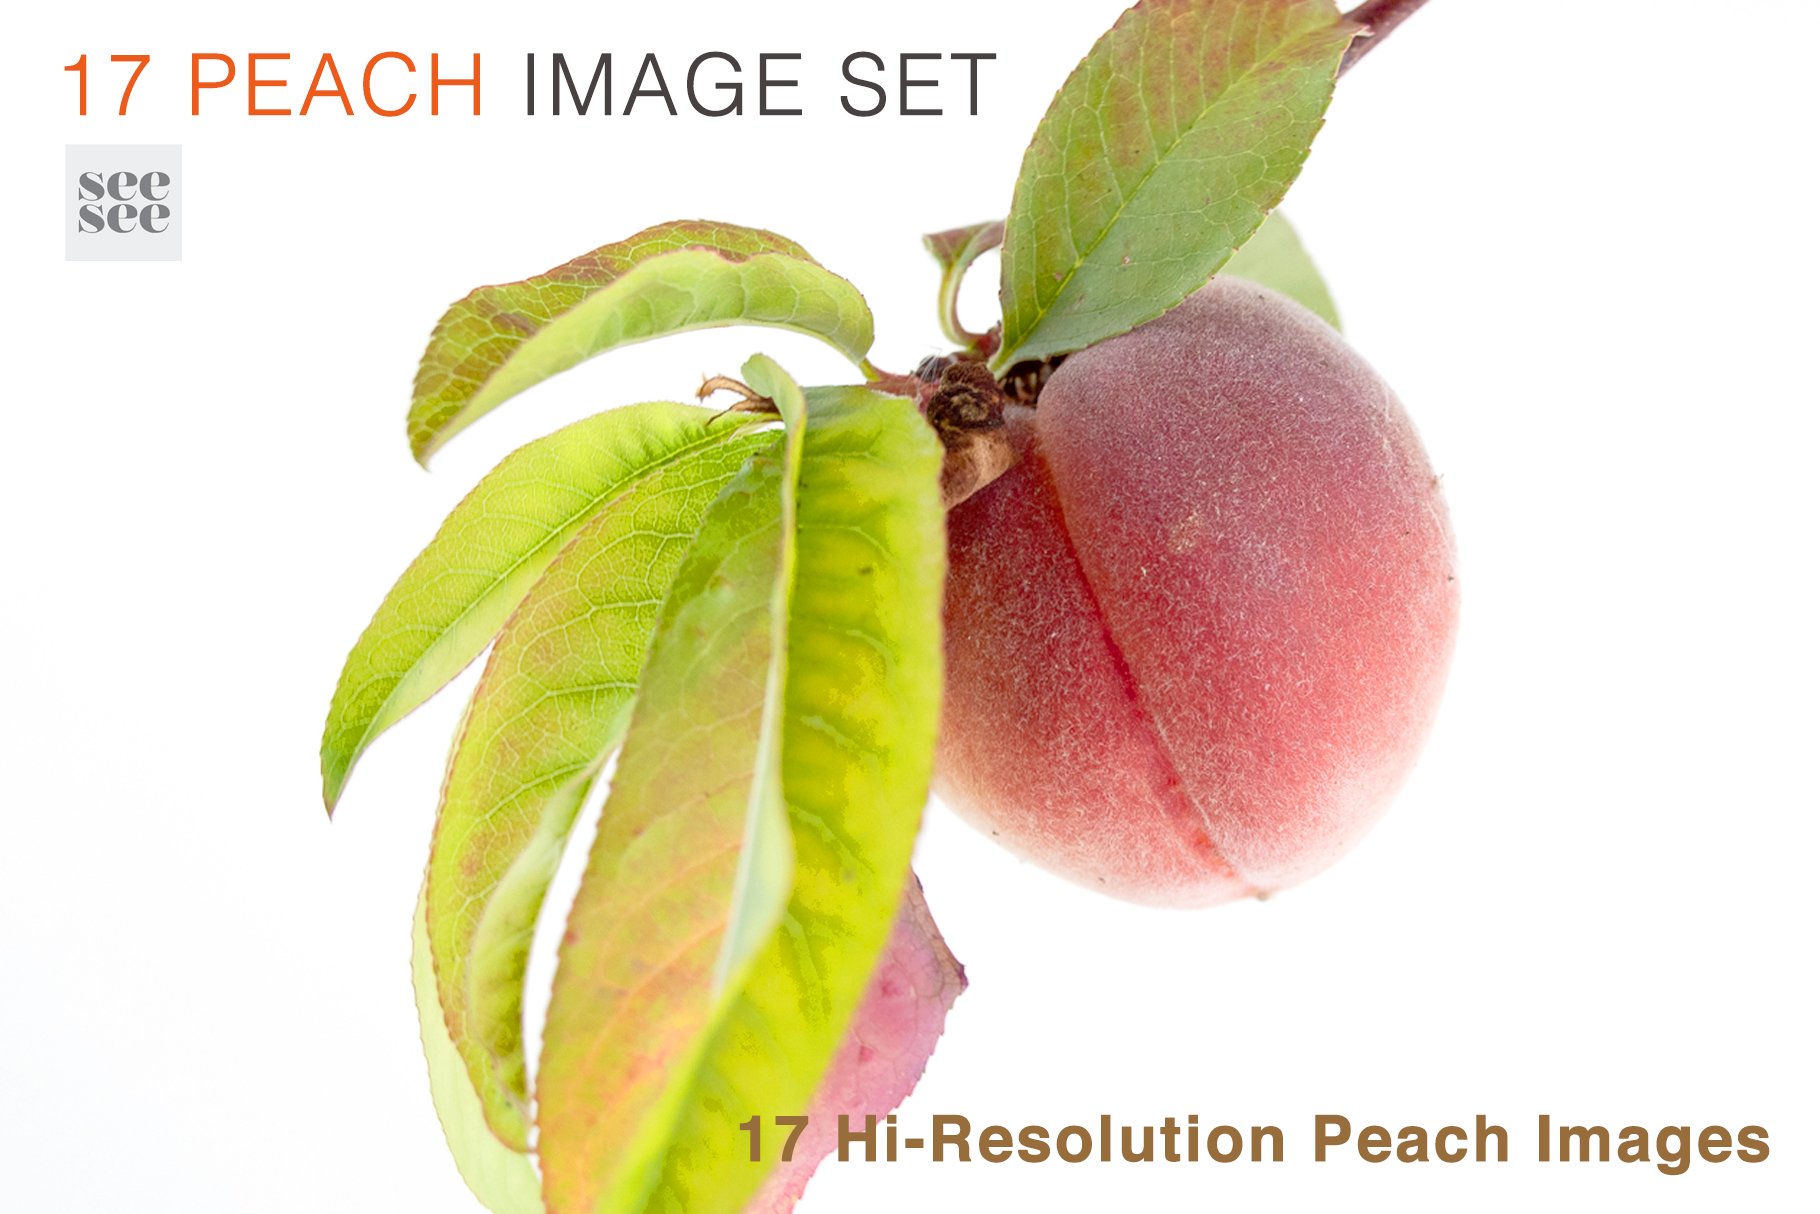 Enjoy the beauty of summertime fruit with this image set.